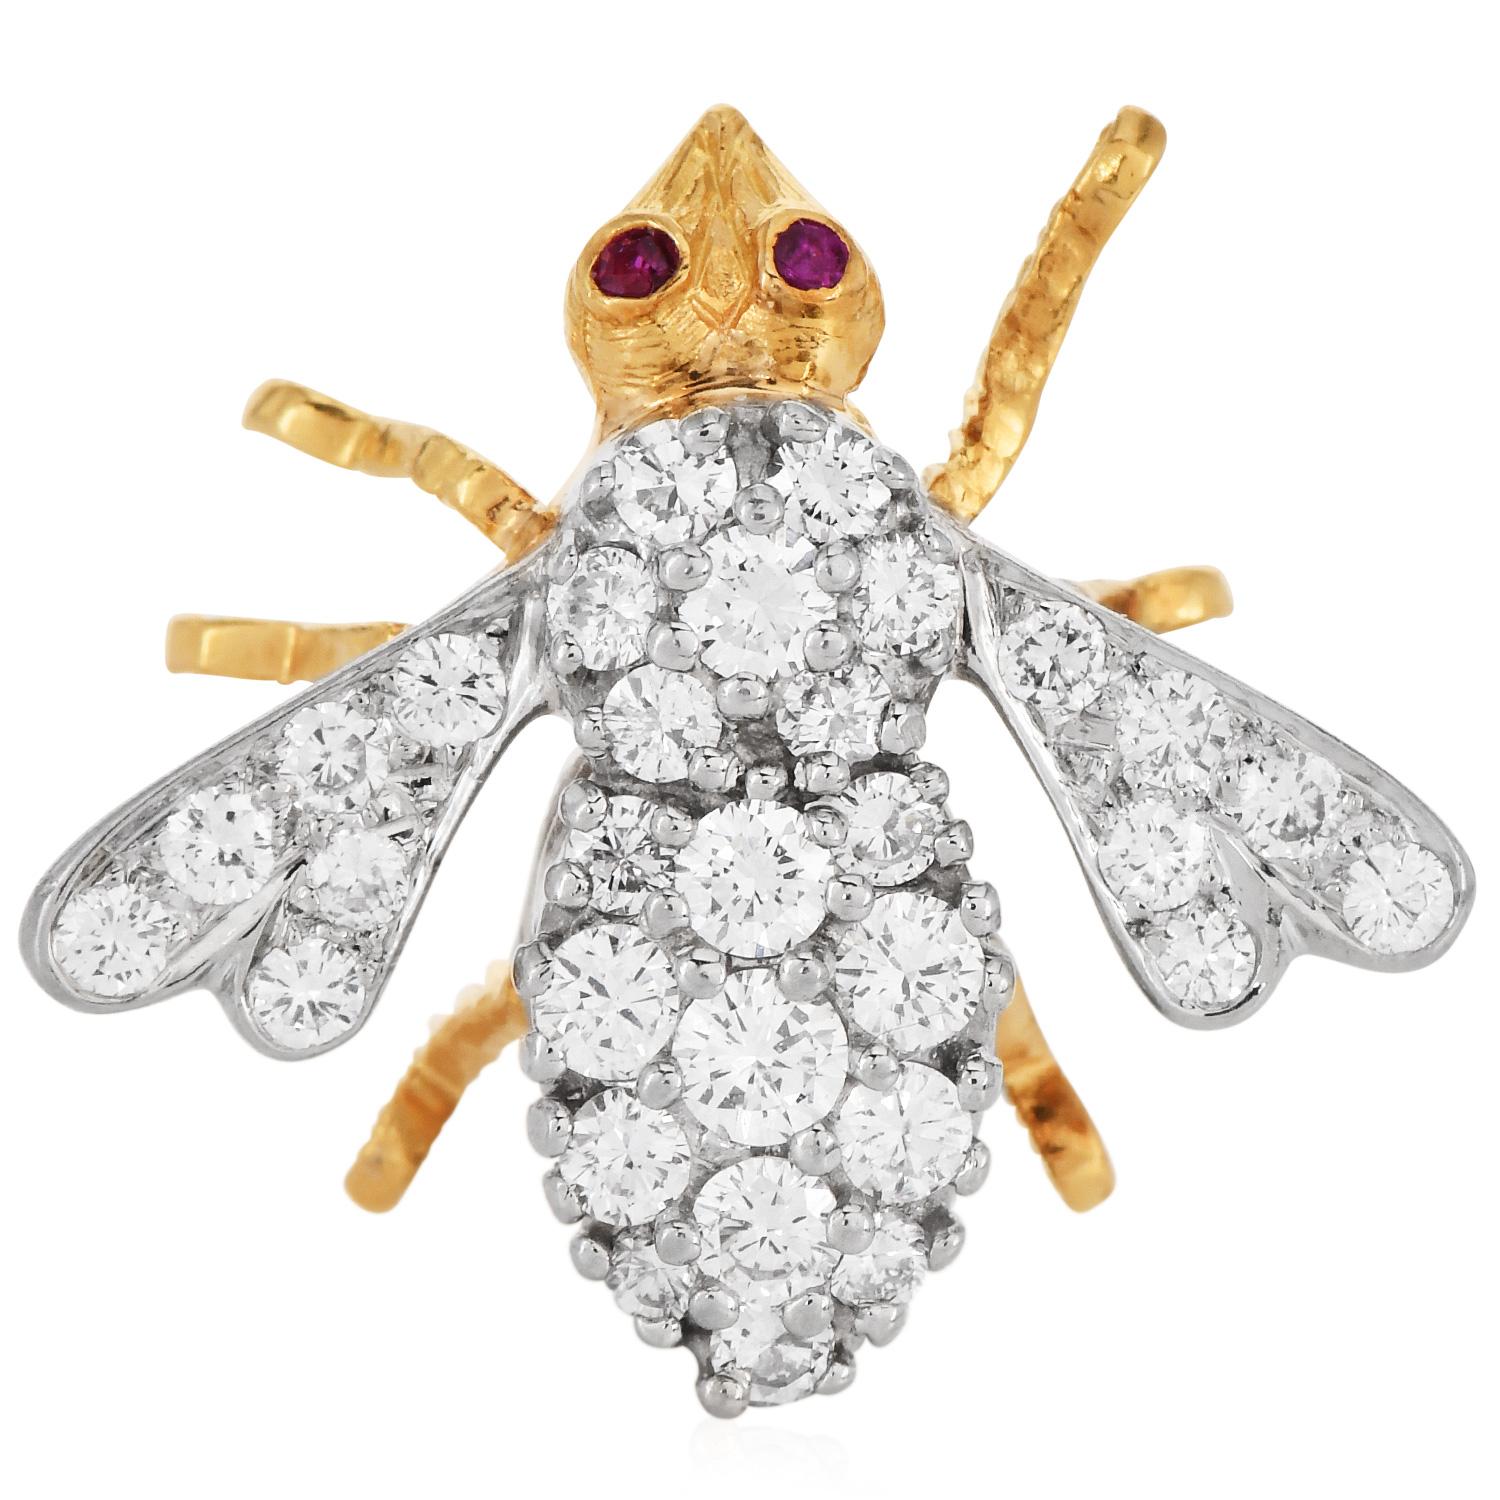 This charming Vintage 1970s bee pin by Herbert Rosenthal is set with some large genuine round diamonds weighing approx. 1.50 carats, G-H color, and VS Clarity, and two small rubies in the eyes approx. 0.02 carats. 

Rosenthal bees are